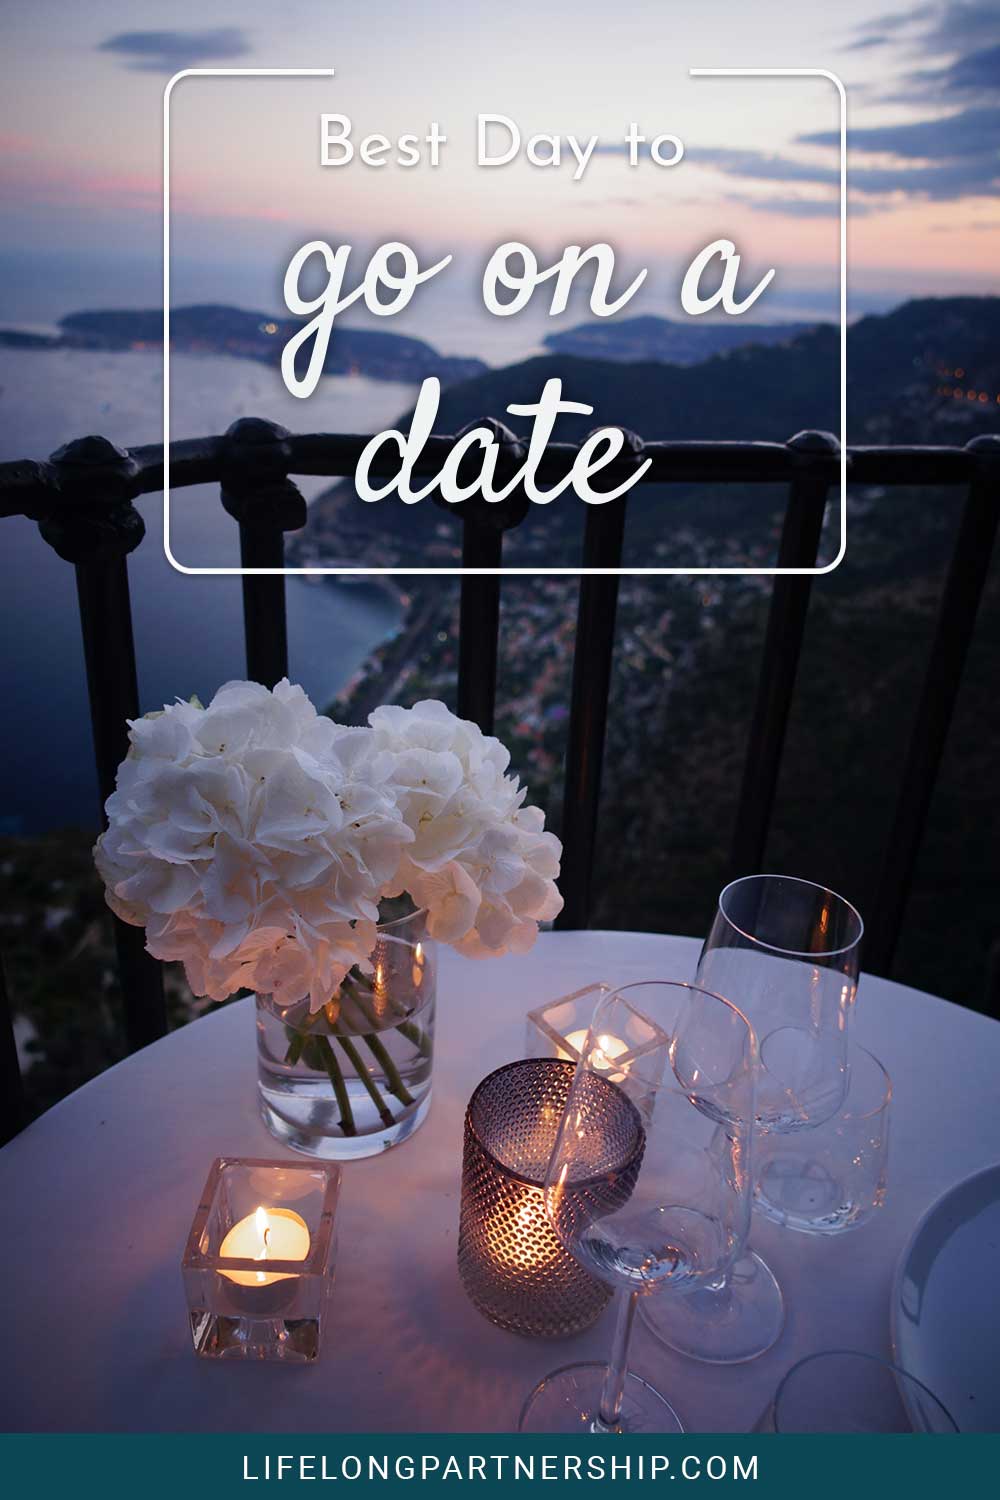 Flowers and candles on a table near mountains - Best day to go on a date